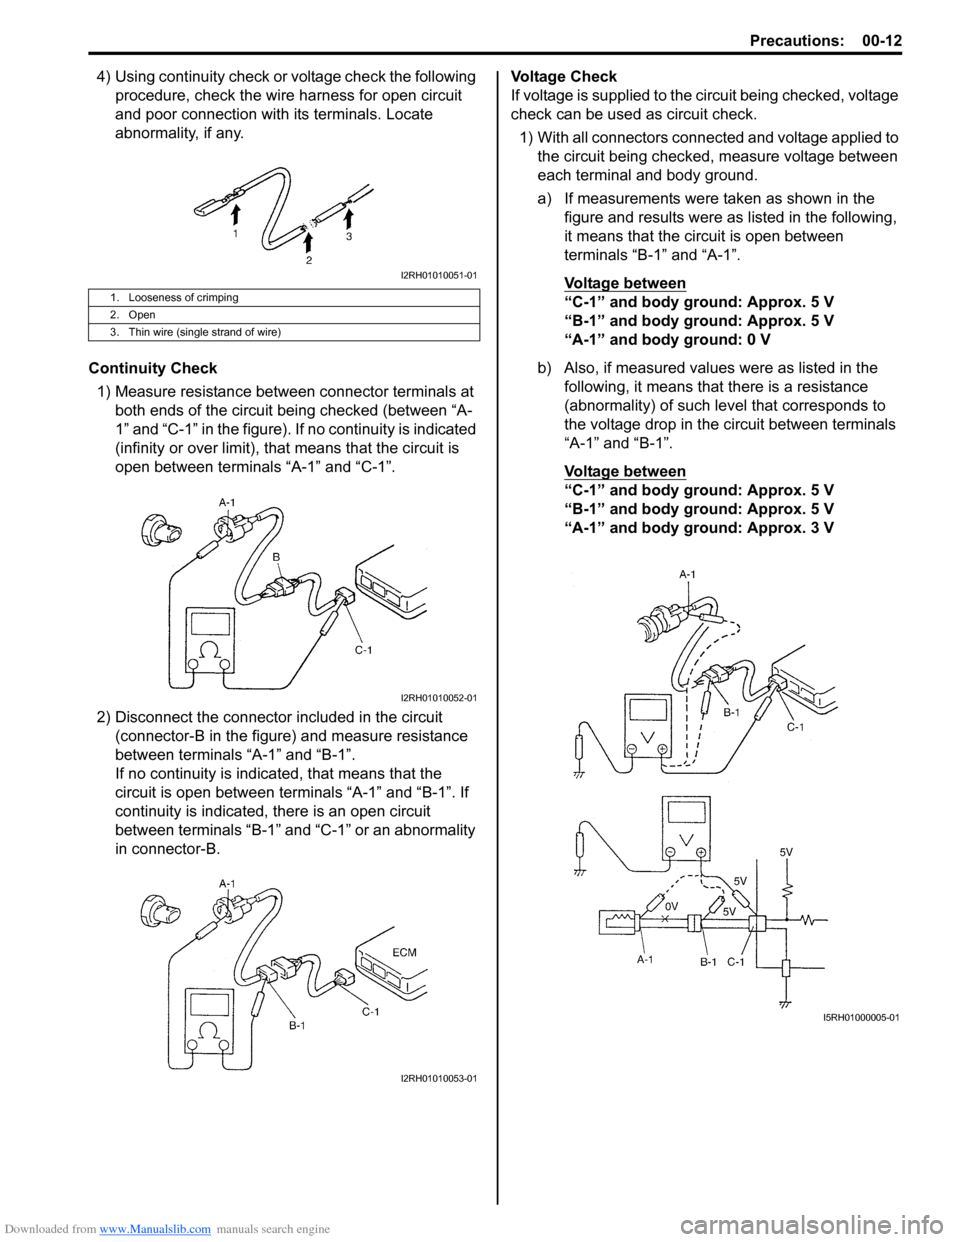 SUZUKI SWIFT 2008 2.G Service User Guide Downloaded from www.Manualslib.com manuals search engine Precautions: 00-12
4) Using continuity check or voltage check the following procedure, check the wire harness for open circuit 
and poor connec